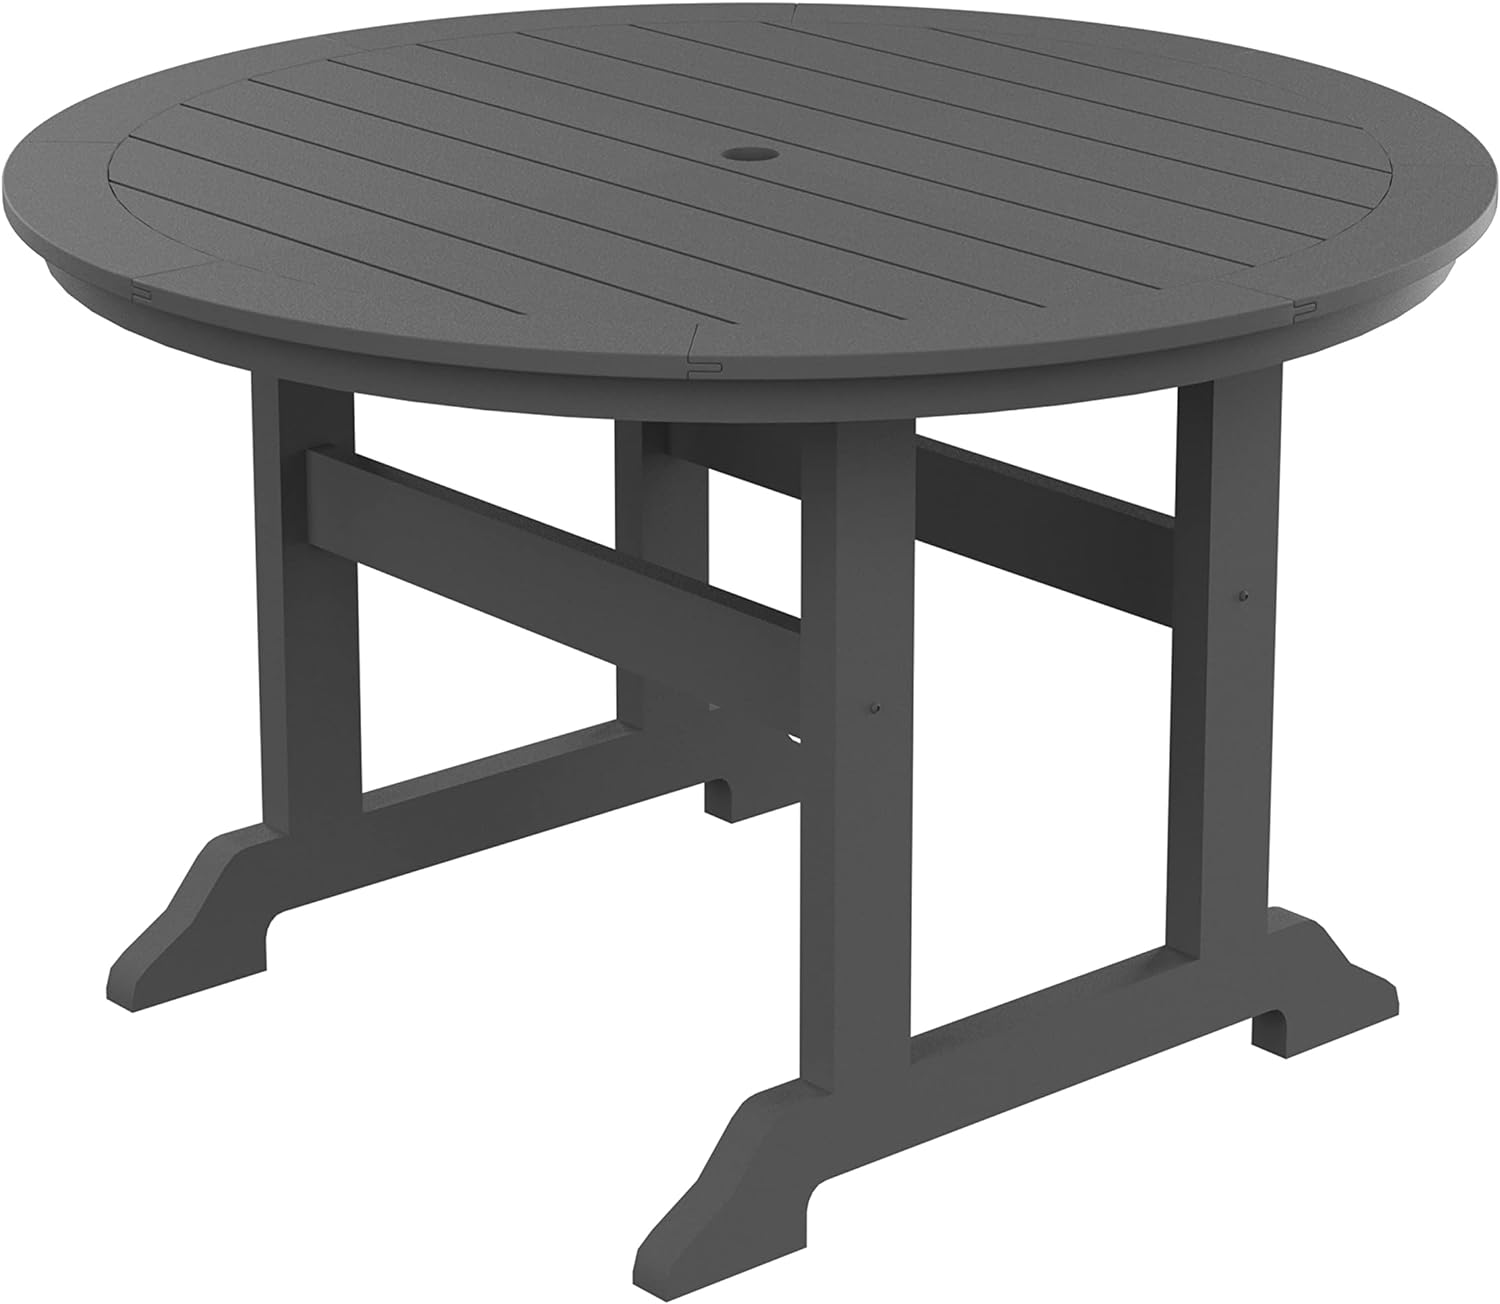 WILLIAMSPACE Patio Dining Table, 48 Round 4 Person All Weather Outdoor Dining Table with 1.96 Umbrella Hole, Outside Patio Furniture for Patio, Deck, Yard,Lawn Garden, Grey